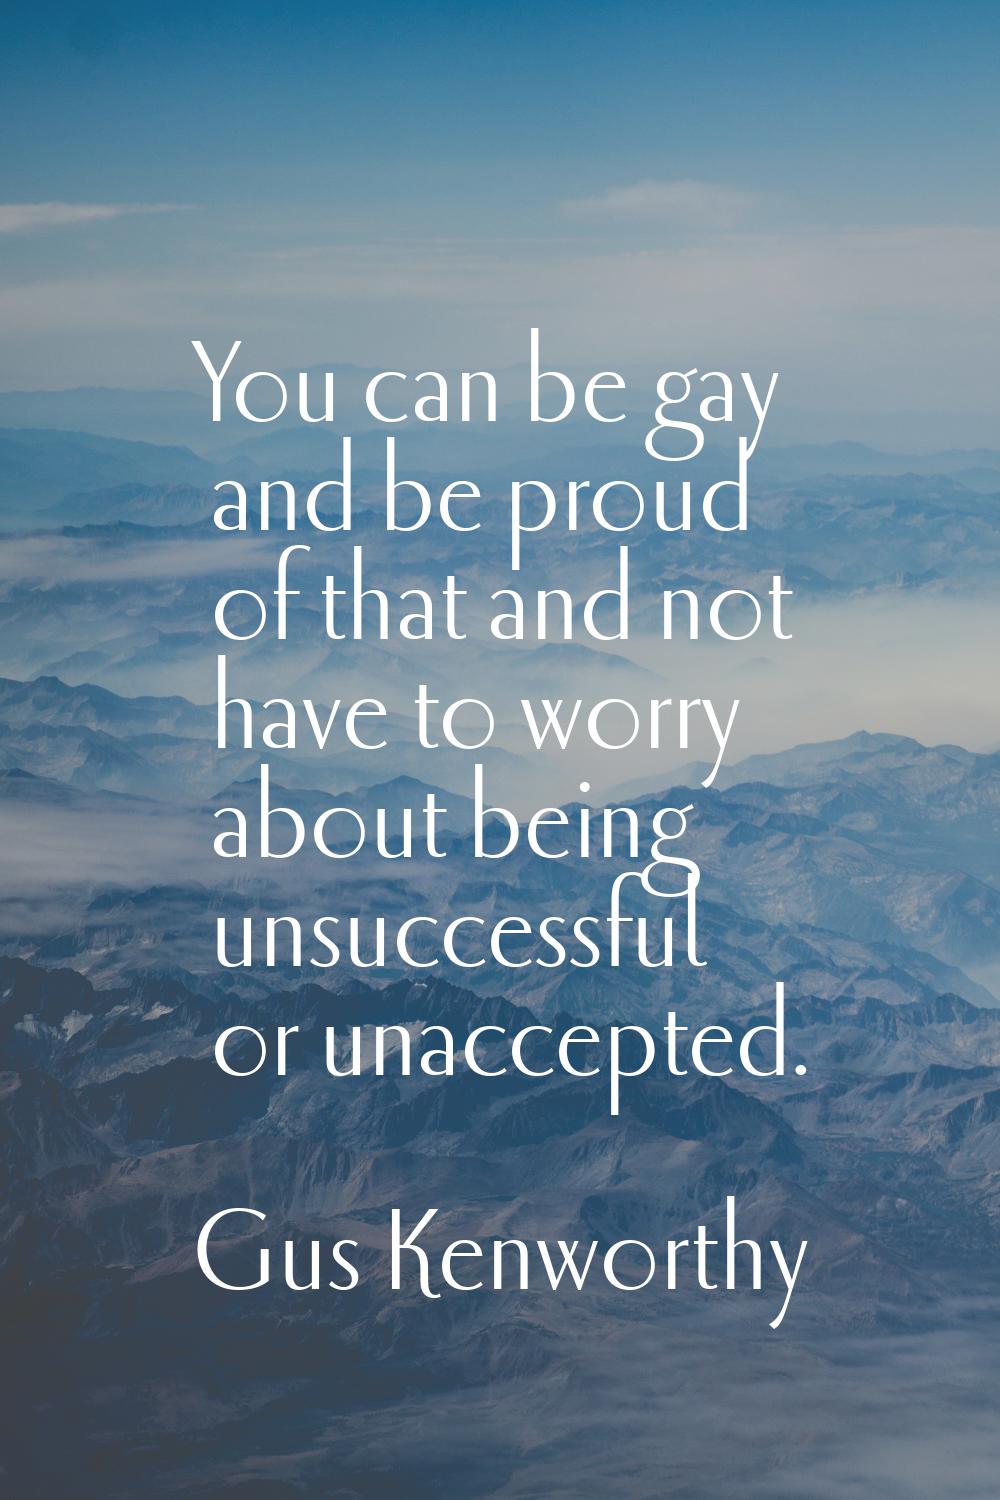 You can be gay and be proud of that and not have to worry about being unsuccessful or unaccepted.